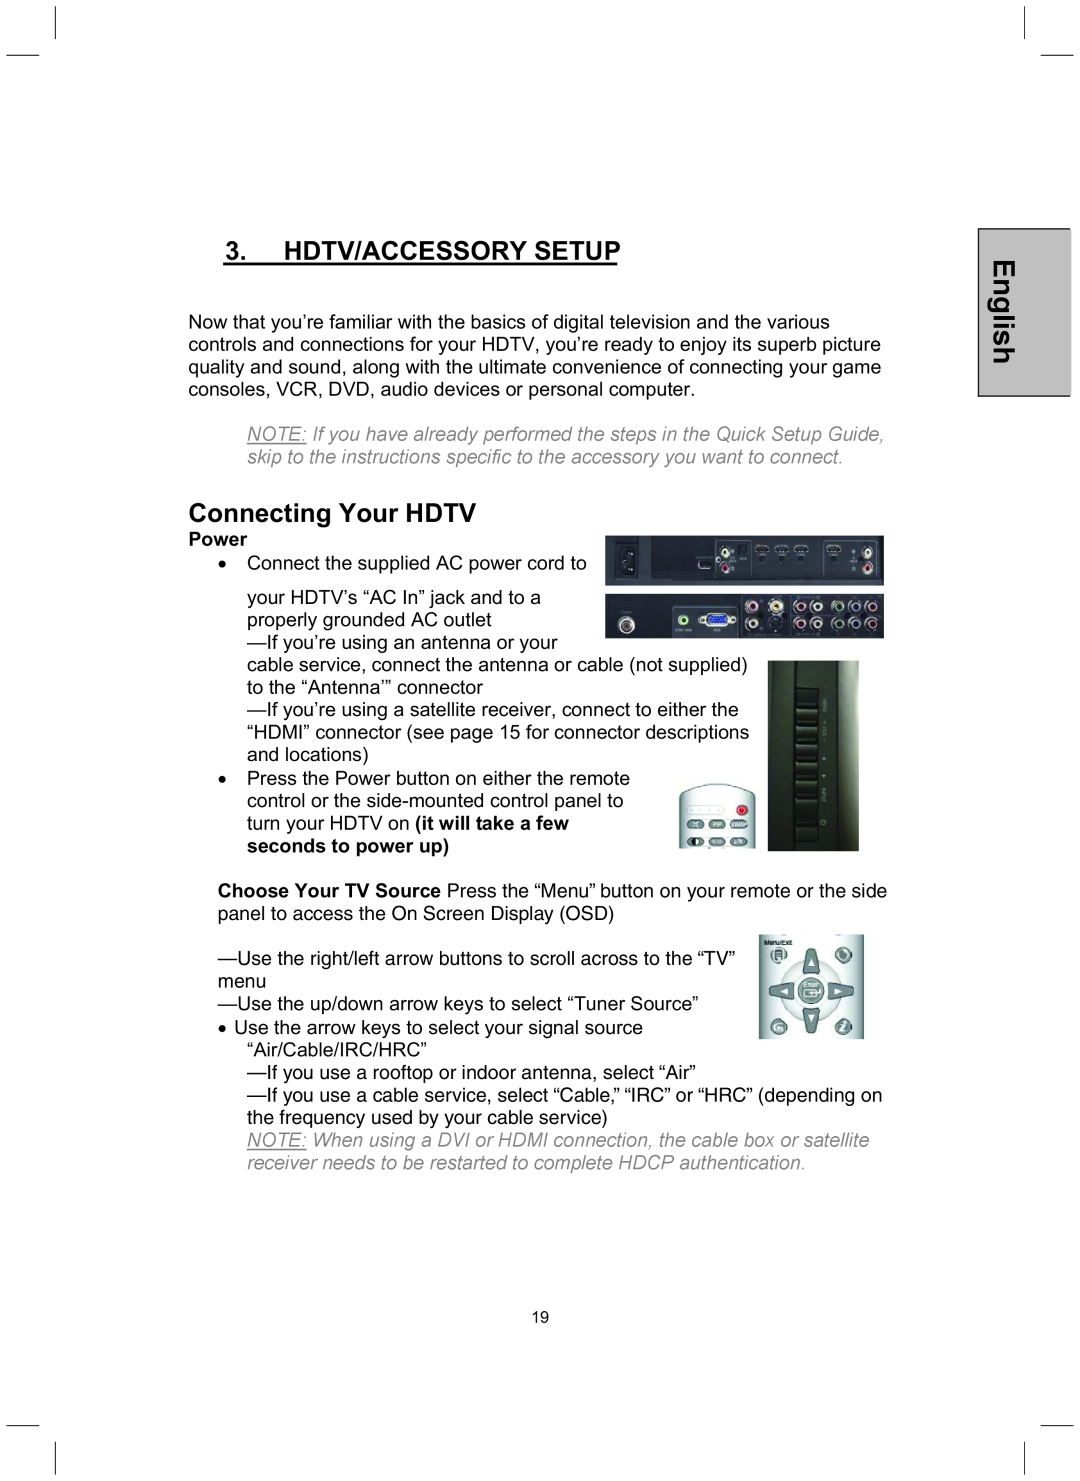 Westinghouse TX-52H480S user manual Hdtv/Accessory Setup, Connecting Your HDTV, Power, English 